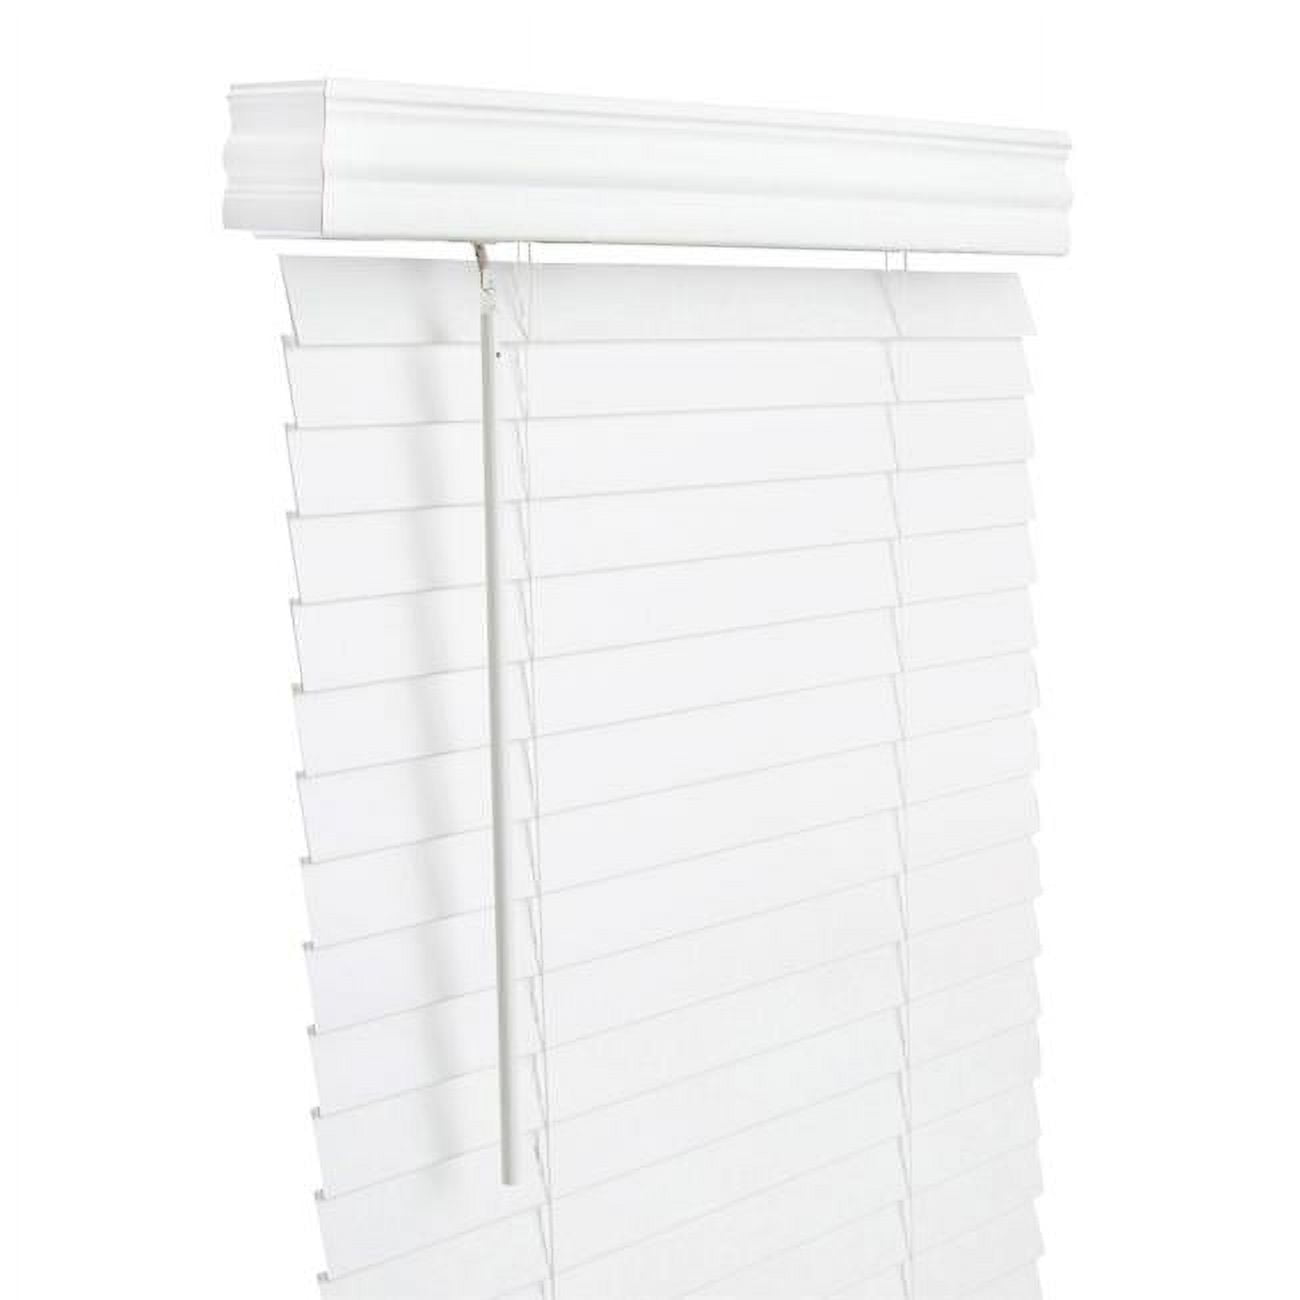 5005757 Faux Wood 2 In. Cordless Mini-blinds, 30 X 60 In. - White